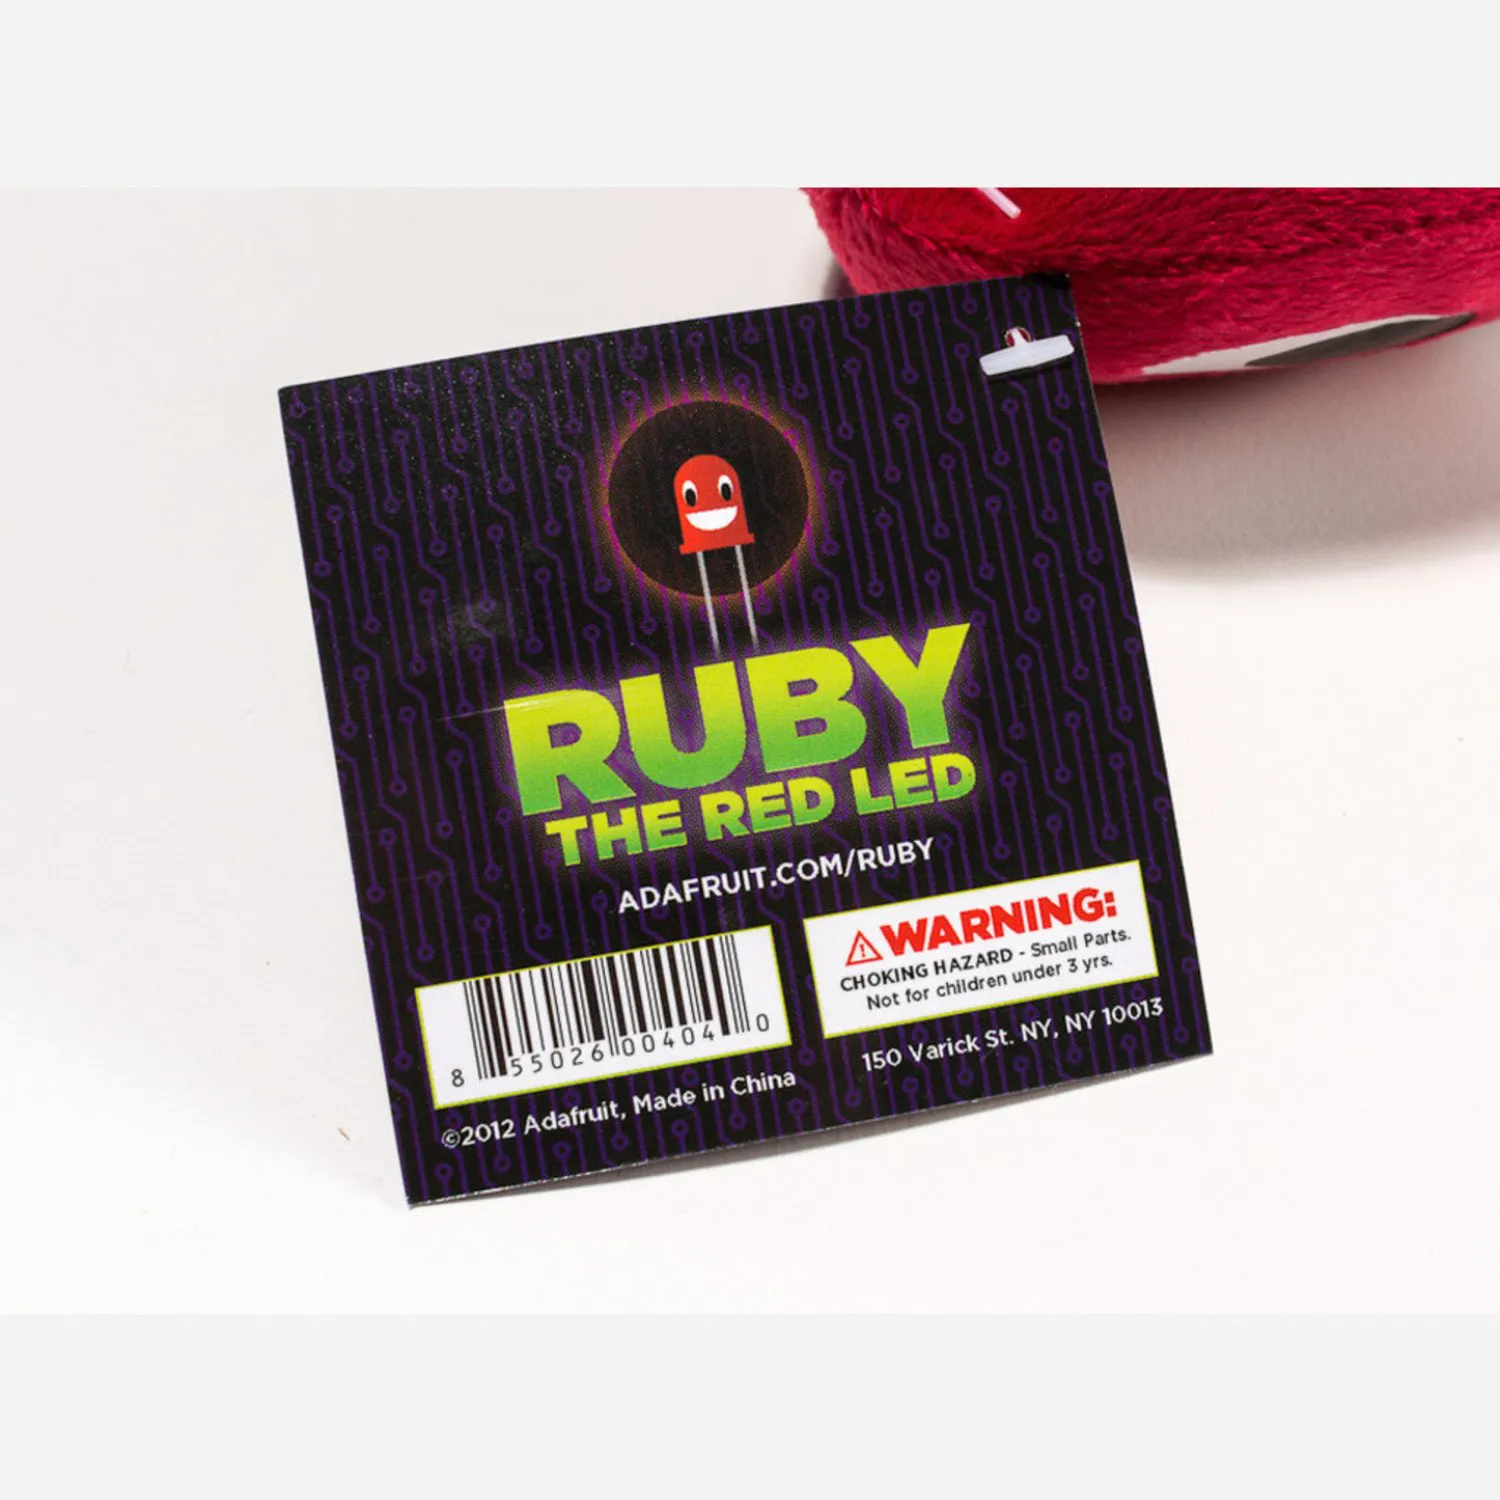 Photo of Ruby the Red LED - Circuit Playground Plushie